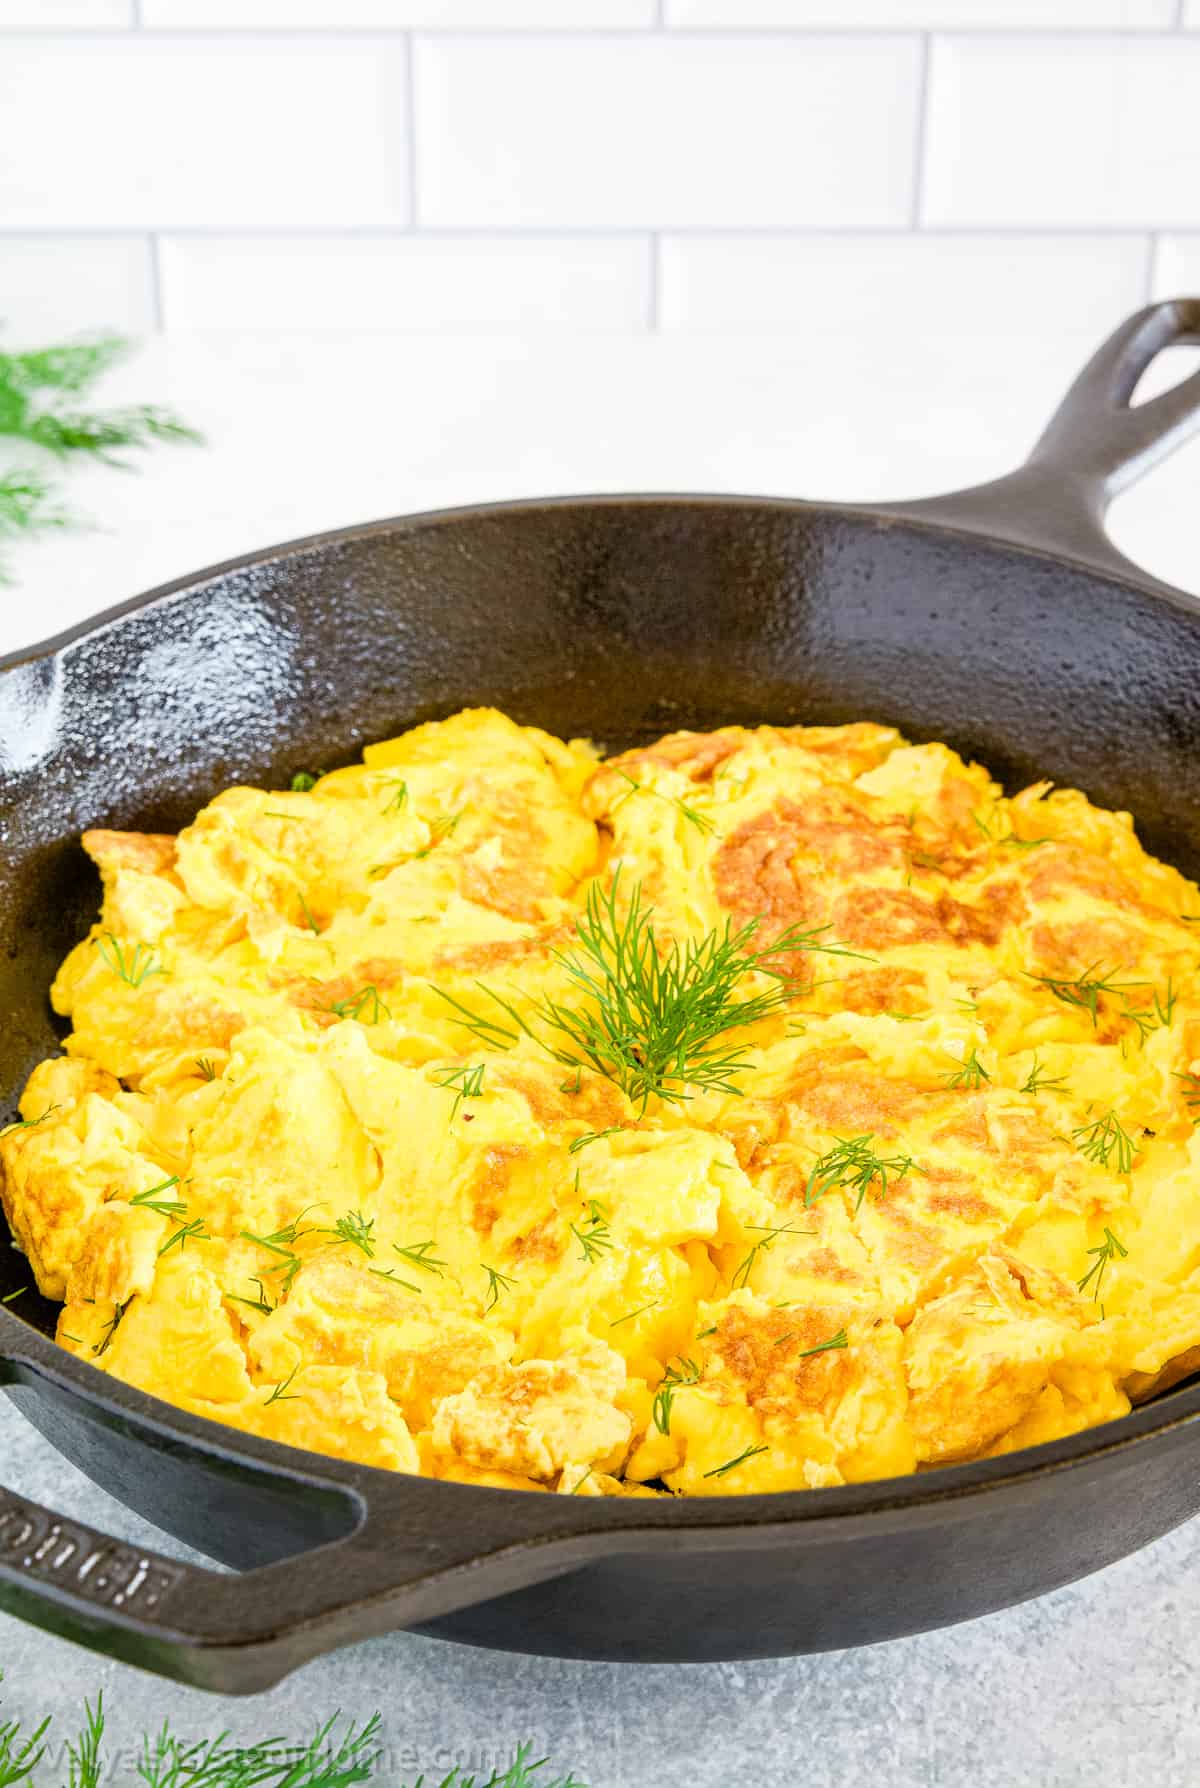 https://www.valyastasteofhome.com/wp-content/uploads/2017/10/How-to-Make-Scrambled-Eggs-Perfectly-Fluffy-Every-Time-1.jpg